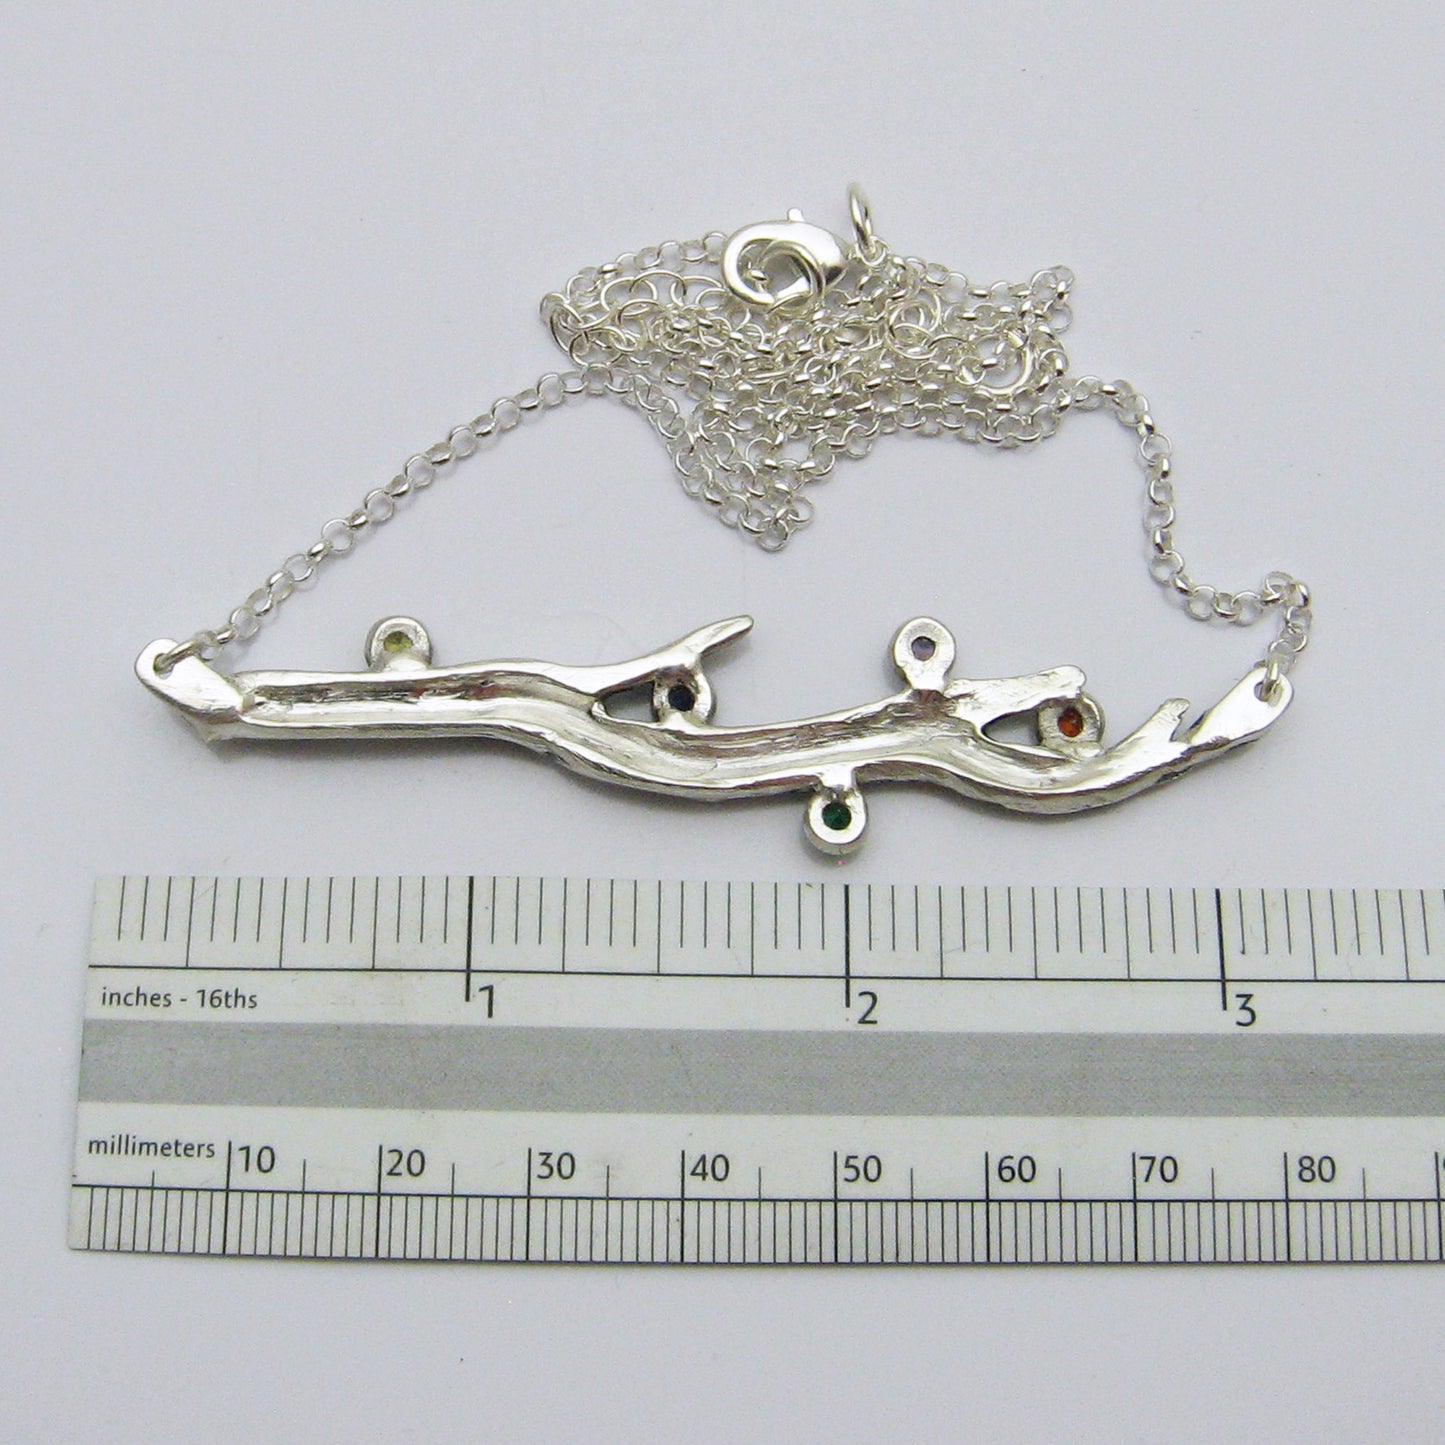 Birthstone Tree Branch Necklace back with ruler for size reference